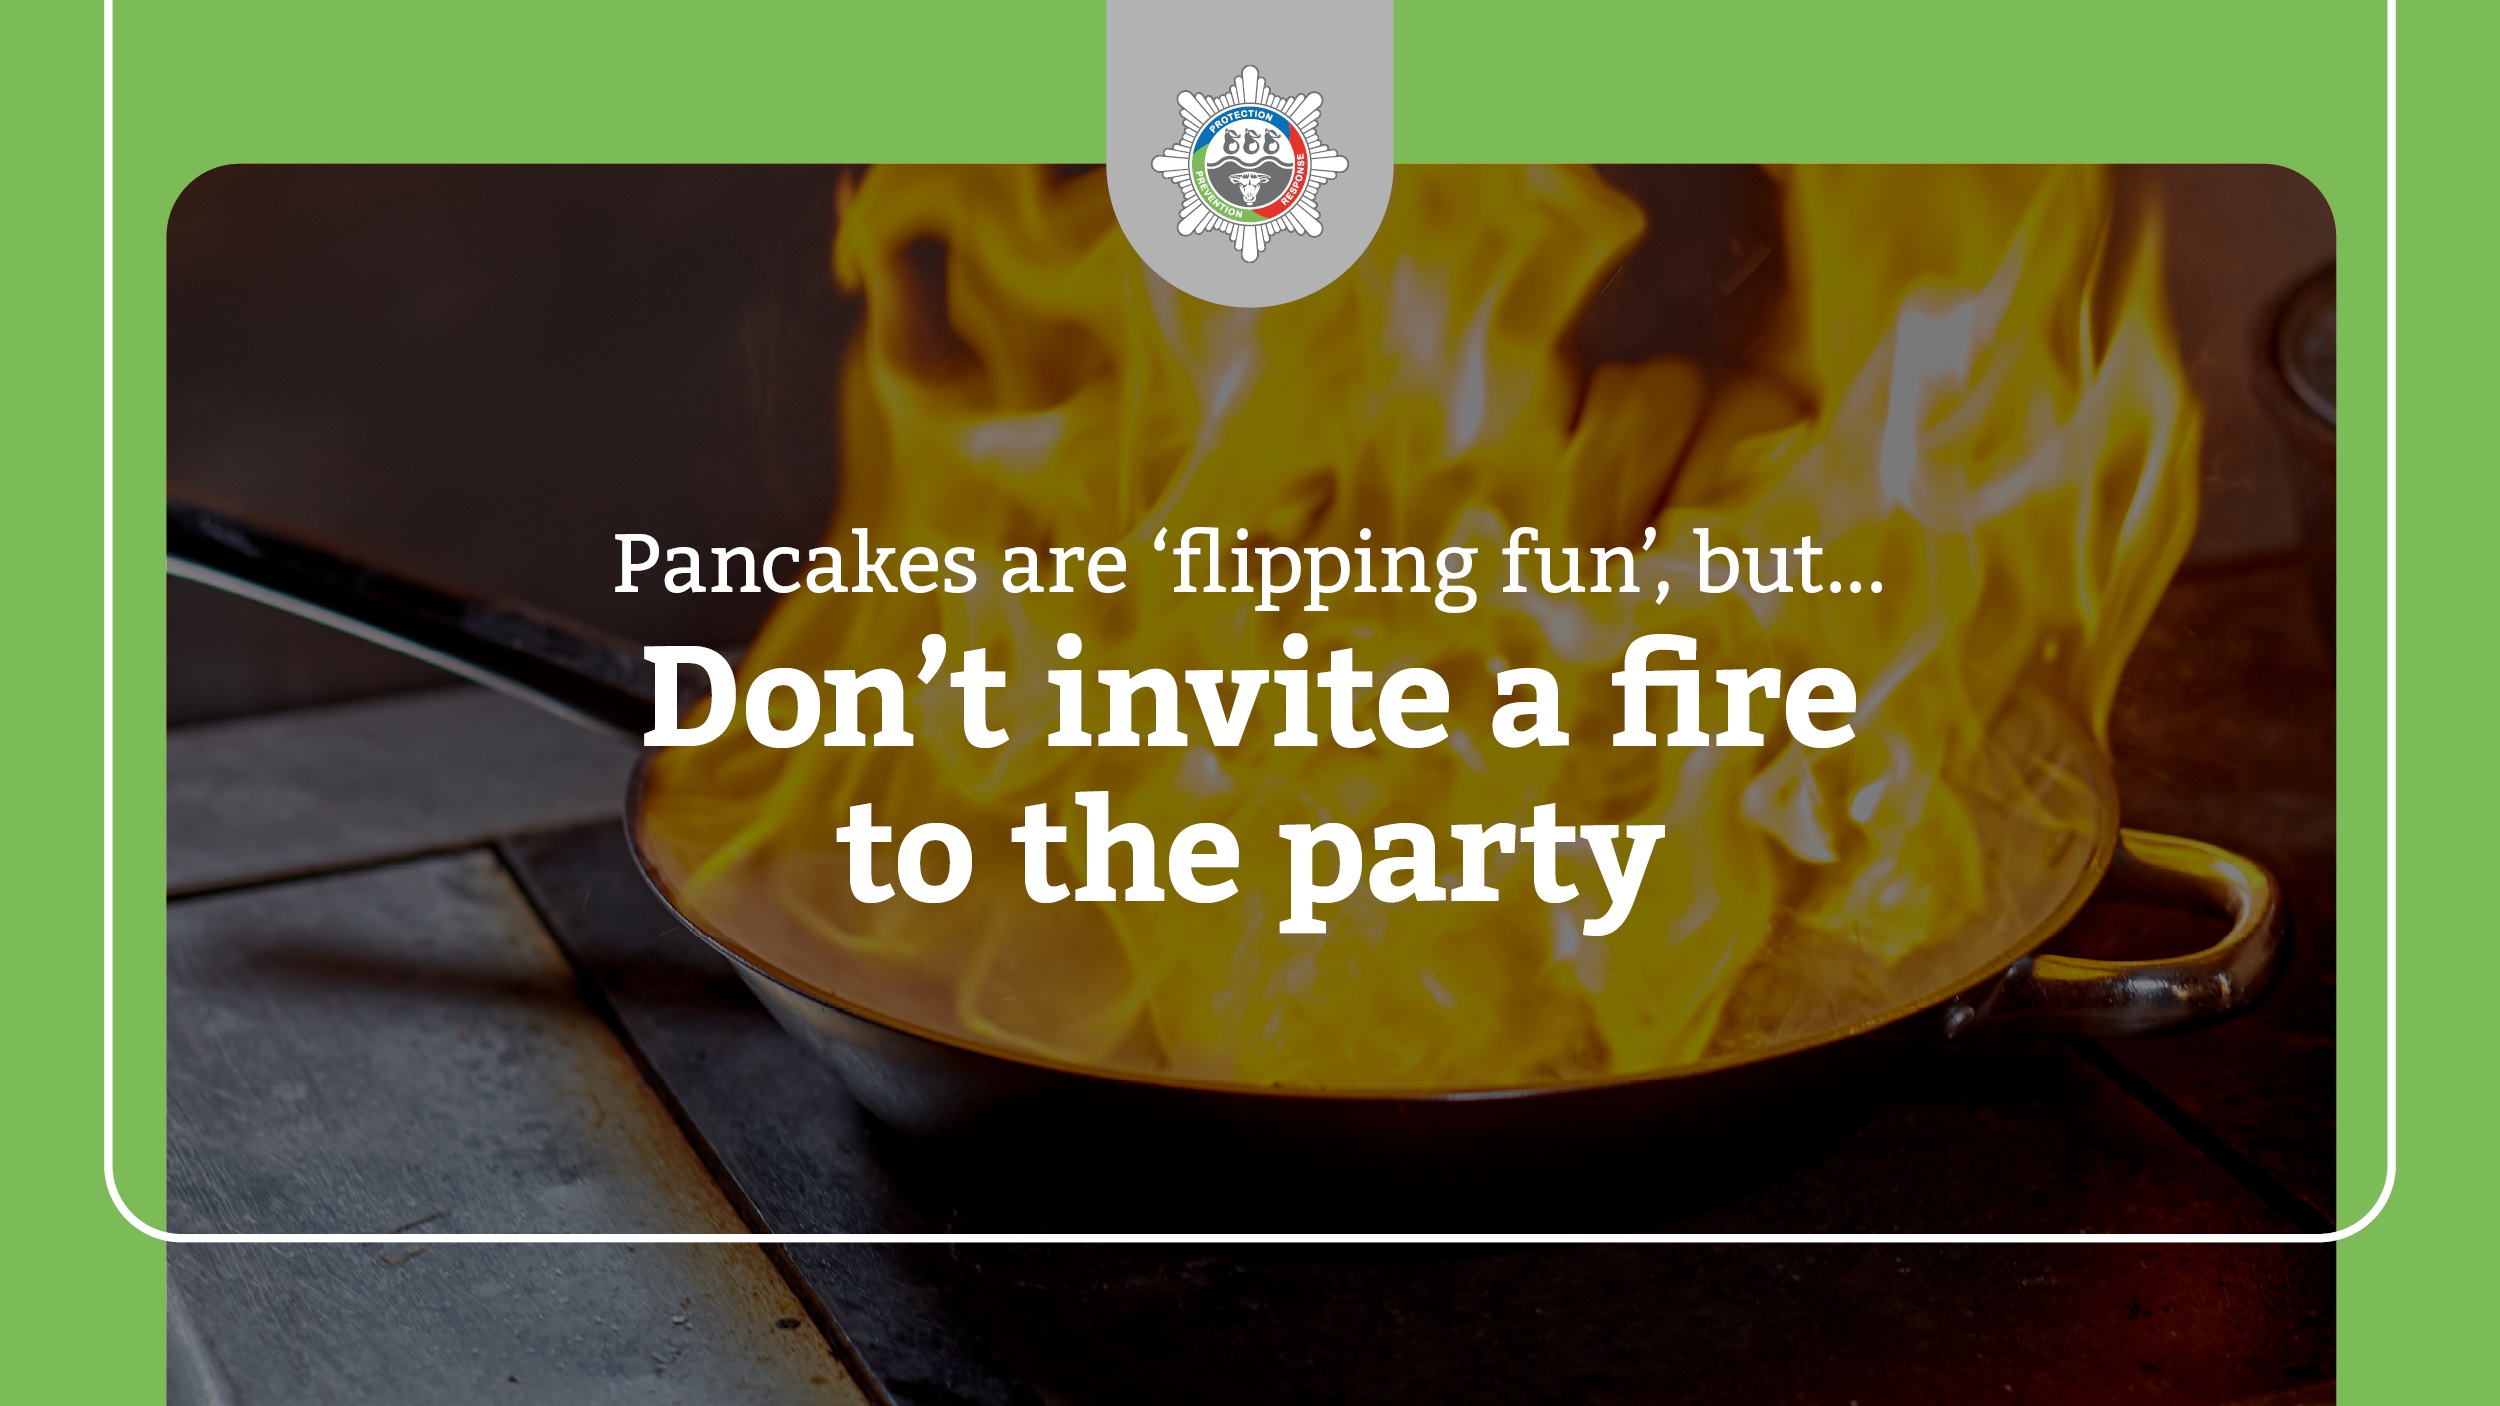 Don’t let flipping pancakes lead to fire